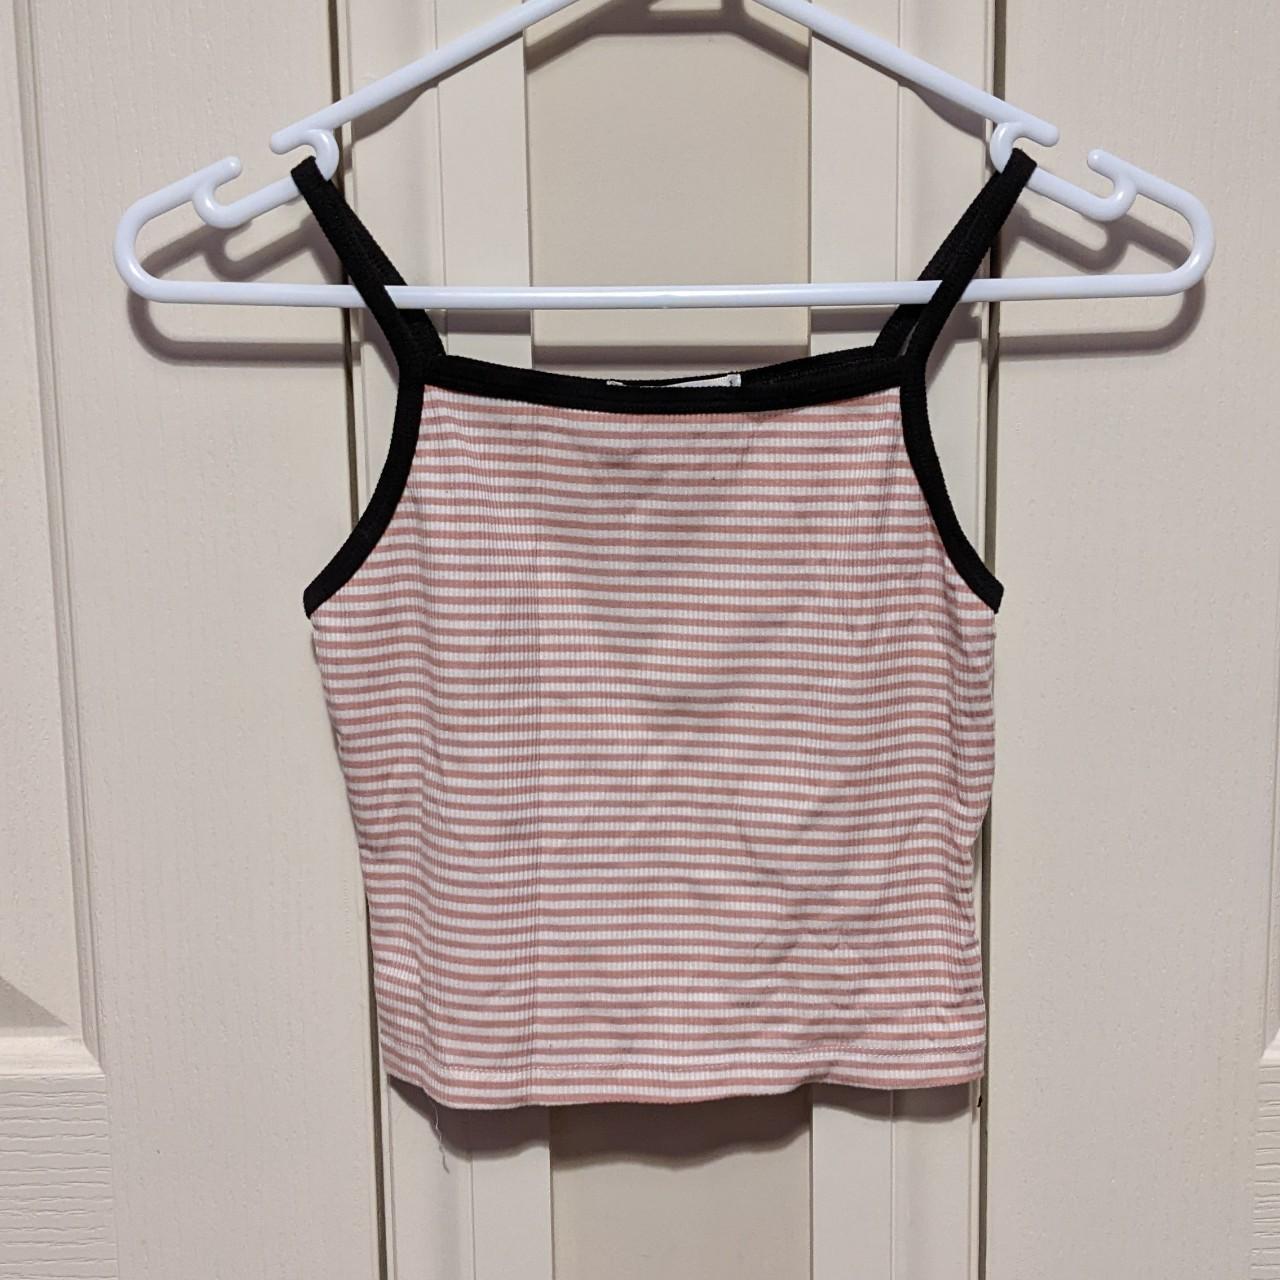 Ally Fashion Pink and White Striped Cami Top Size S... - Depop